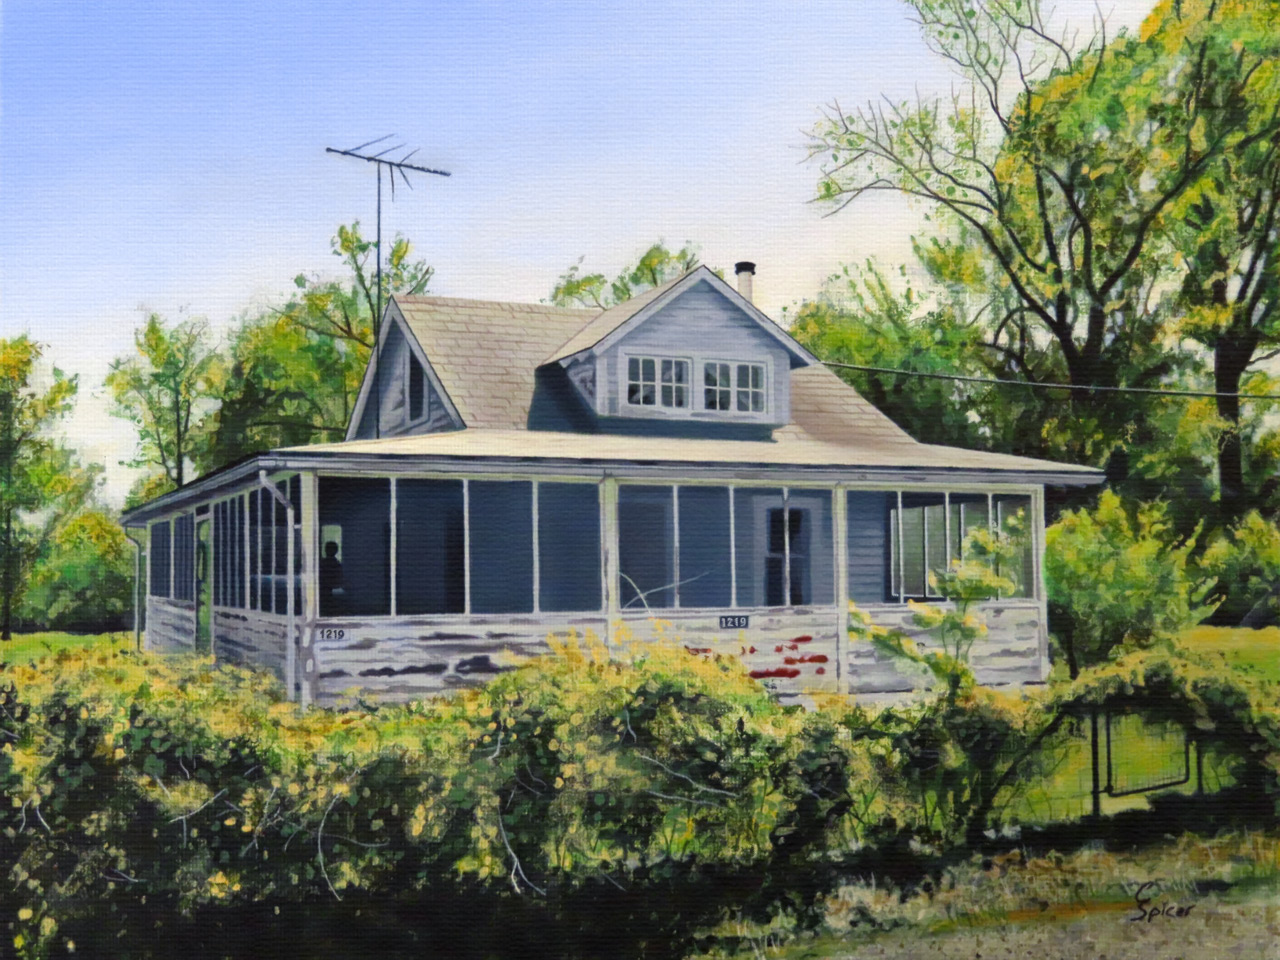 Cottage on Holly Ave - Finished Painting